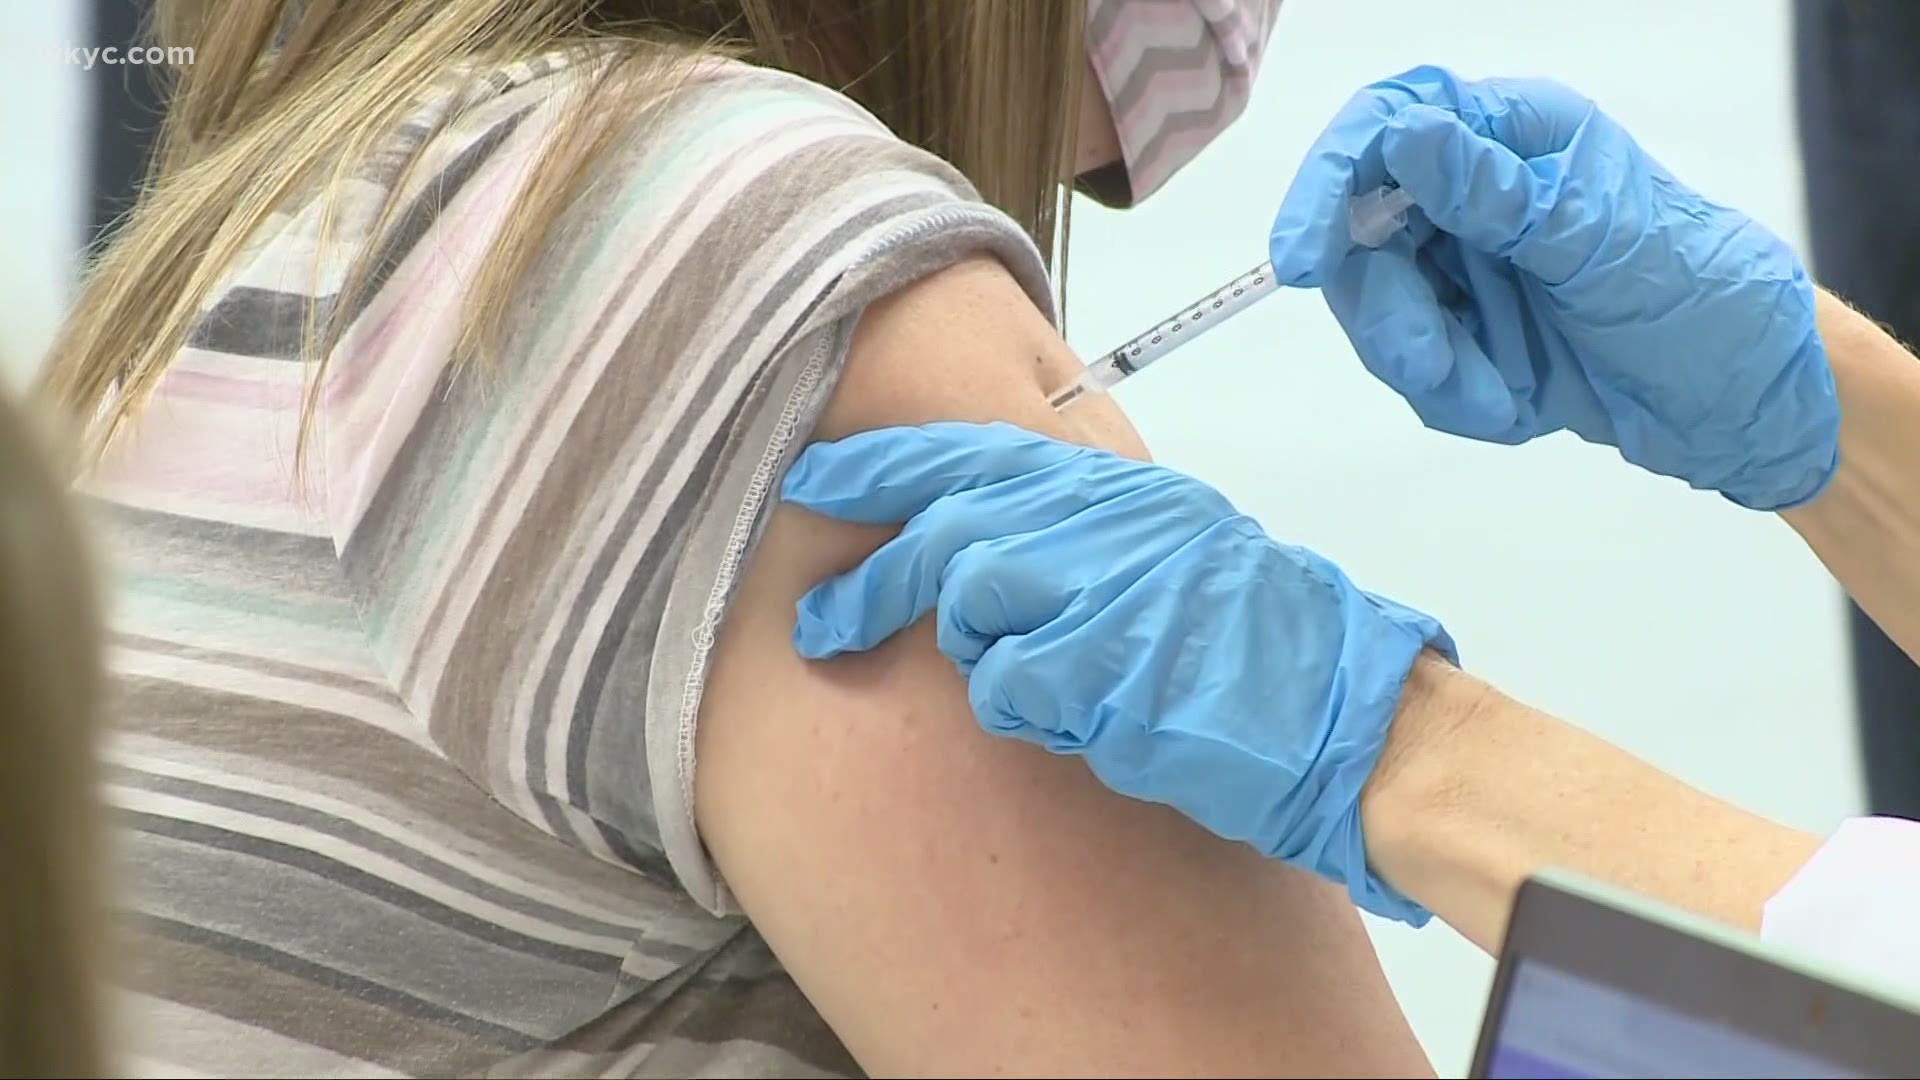 Ohio's daily case numbers today were well below the 14 day average of 1,500 cases. But the number of Ohioans getting vaccinated is also dropping.